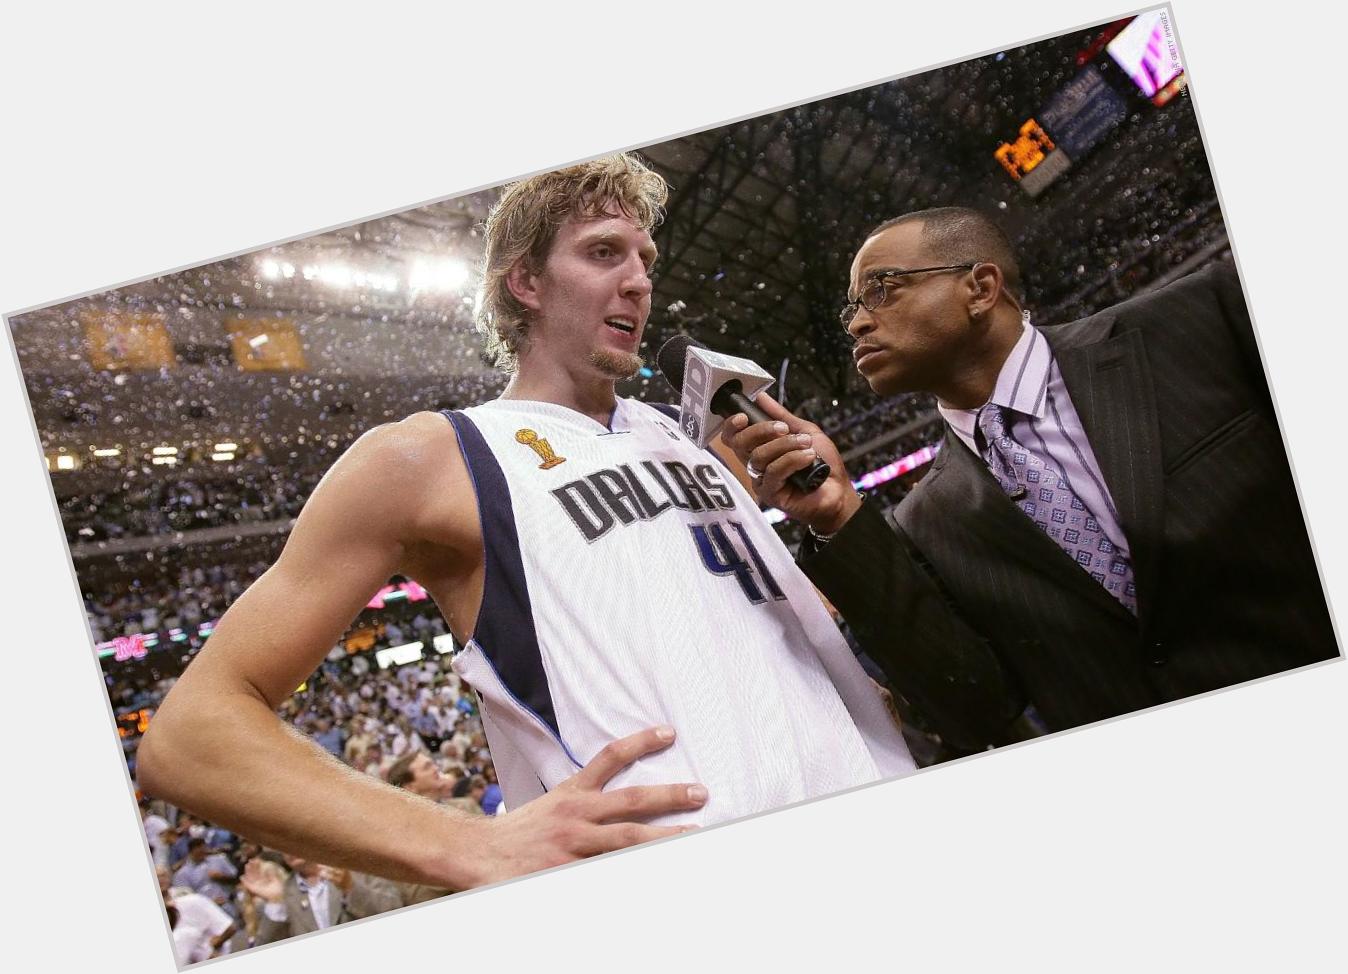 We would like to wish a happy 37th birthday to all-time great Dirk Nowitzki! 